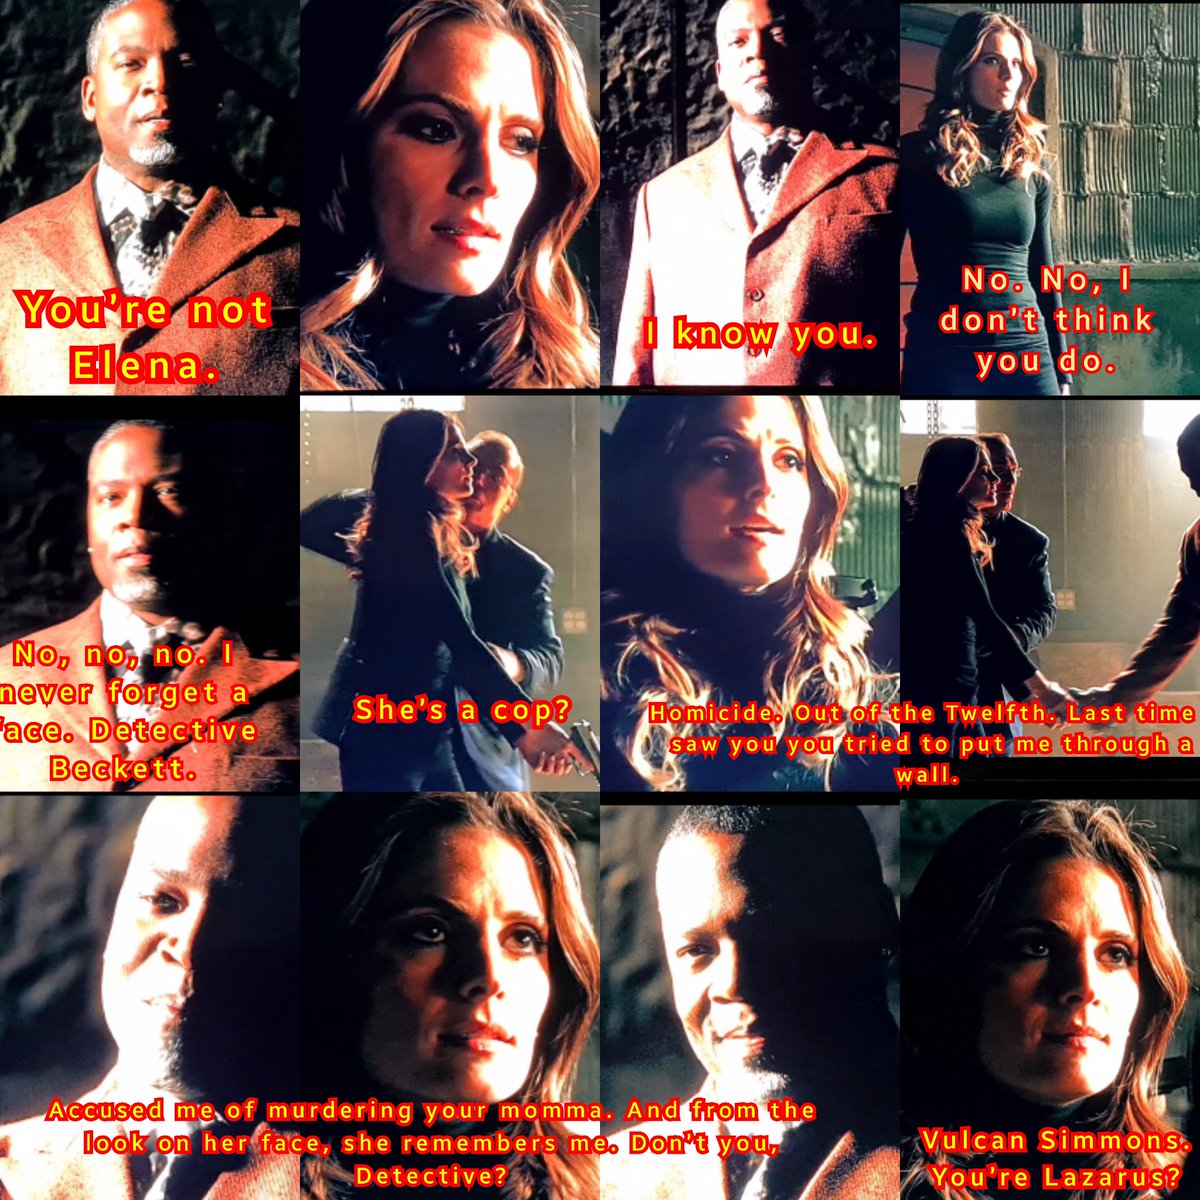 No #Castle aired on 08/12/xx-but a Memory-6x17- IN THE BELLY OF THE BEAST (III/III) 

KB: Because when I stopped the assassination last year, I saved him. And he told me that he owed me. And now we're even. So the next time that we see each other...
C: Come to bed. https://t.co/VCthgkDU5e